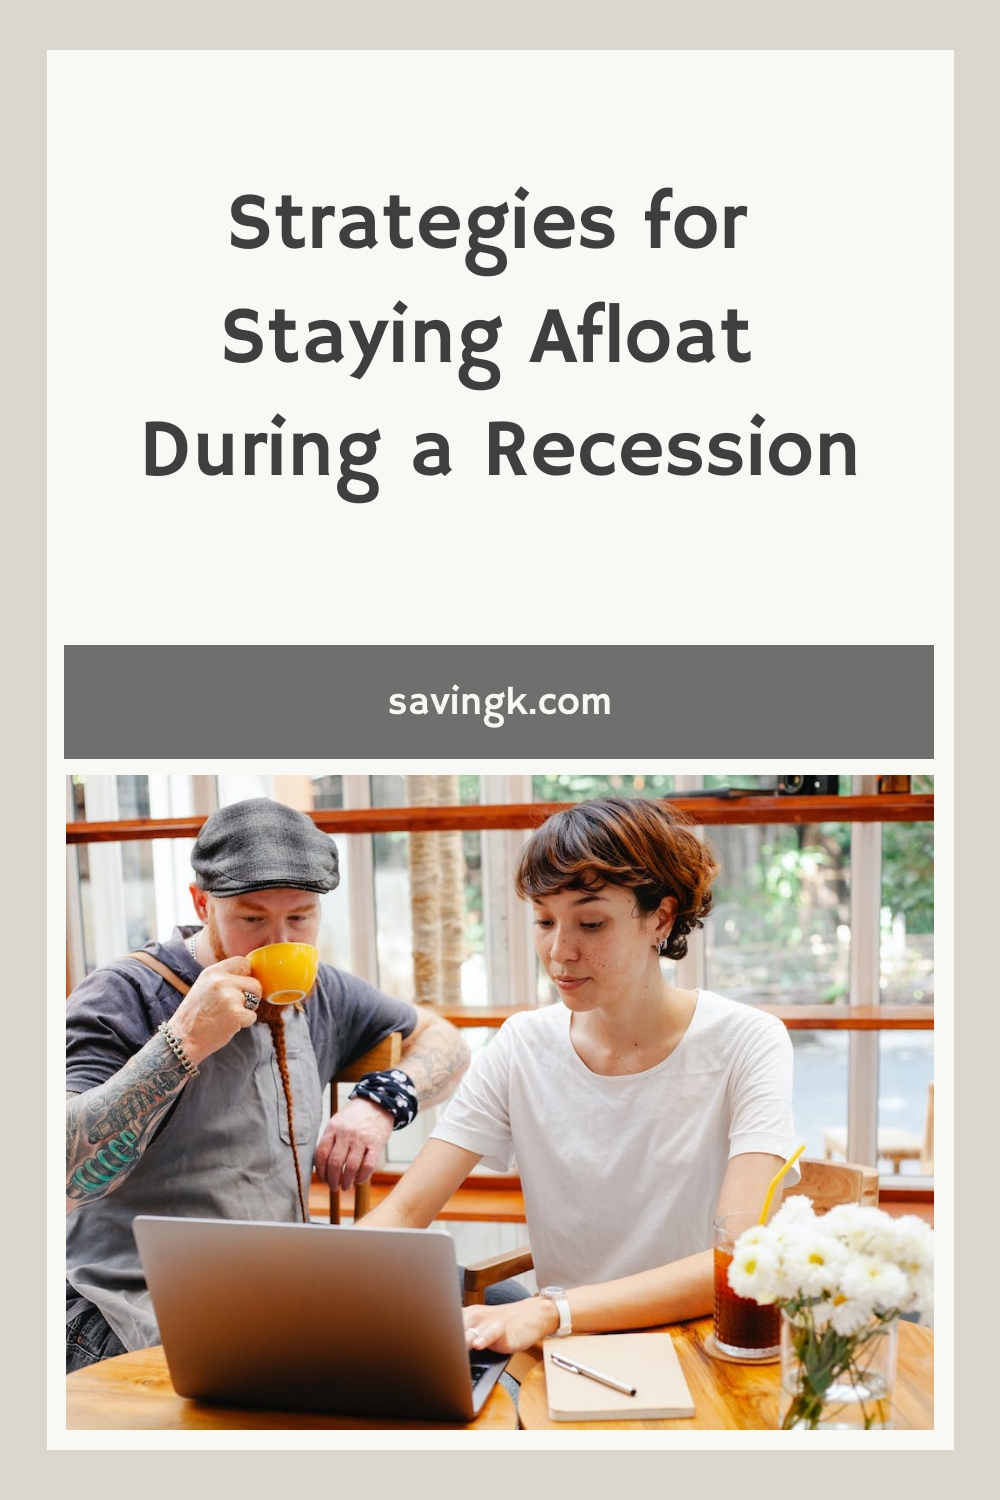 Strategies for Staying Afloat During a Recession